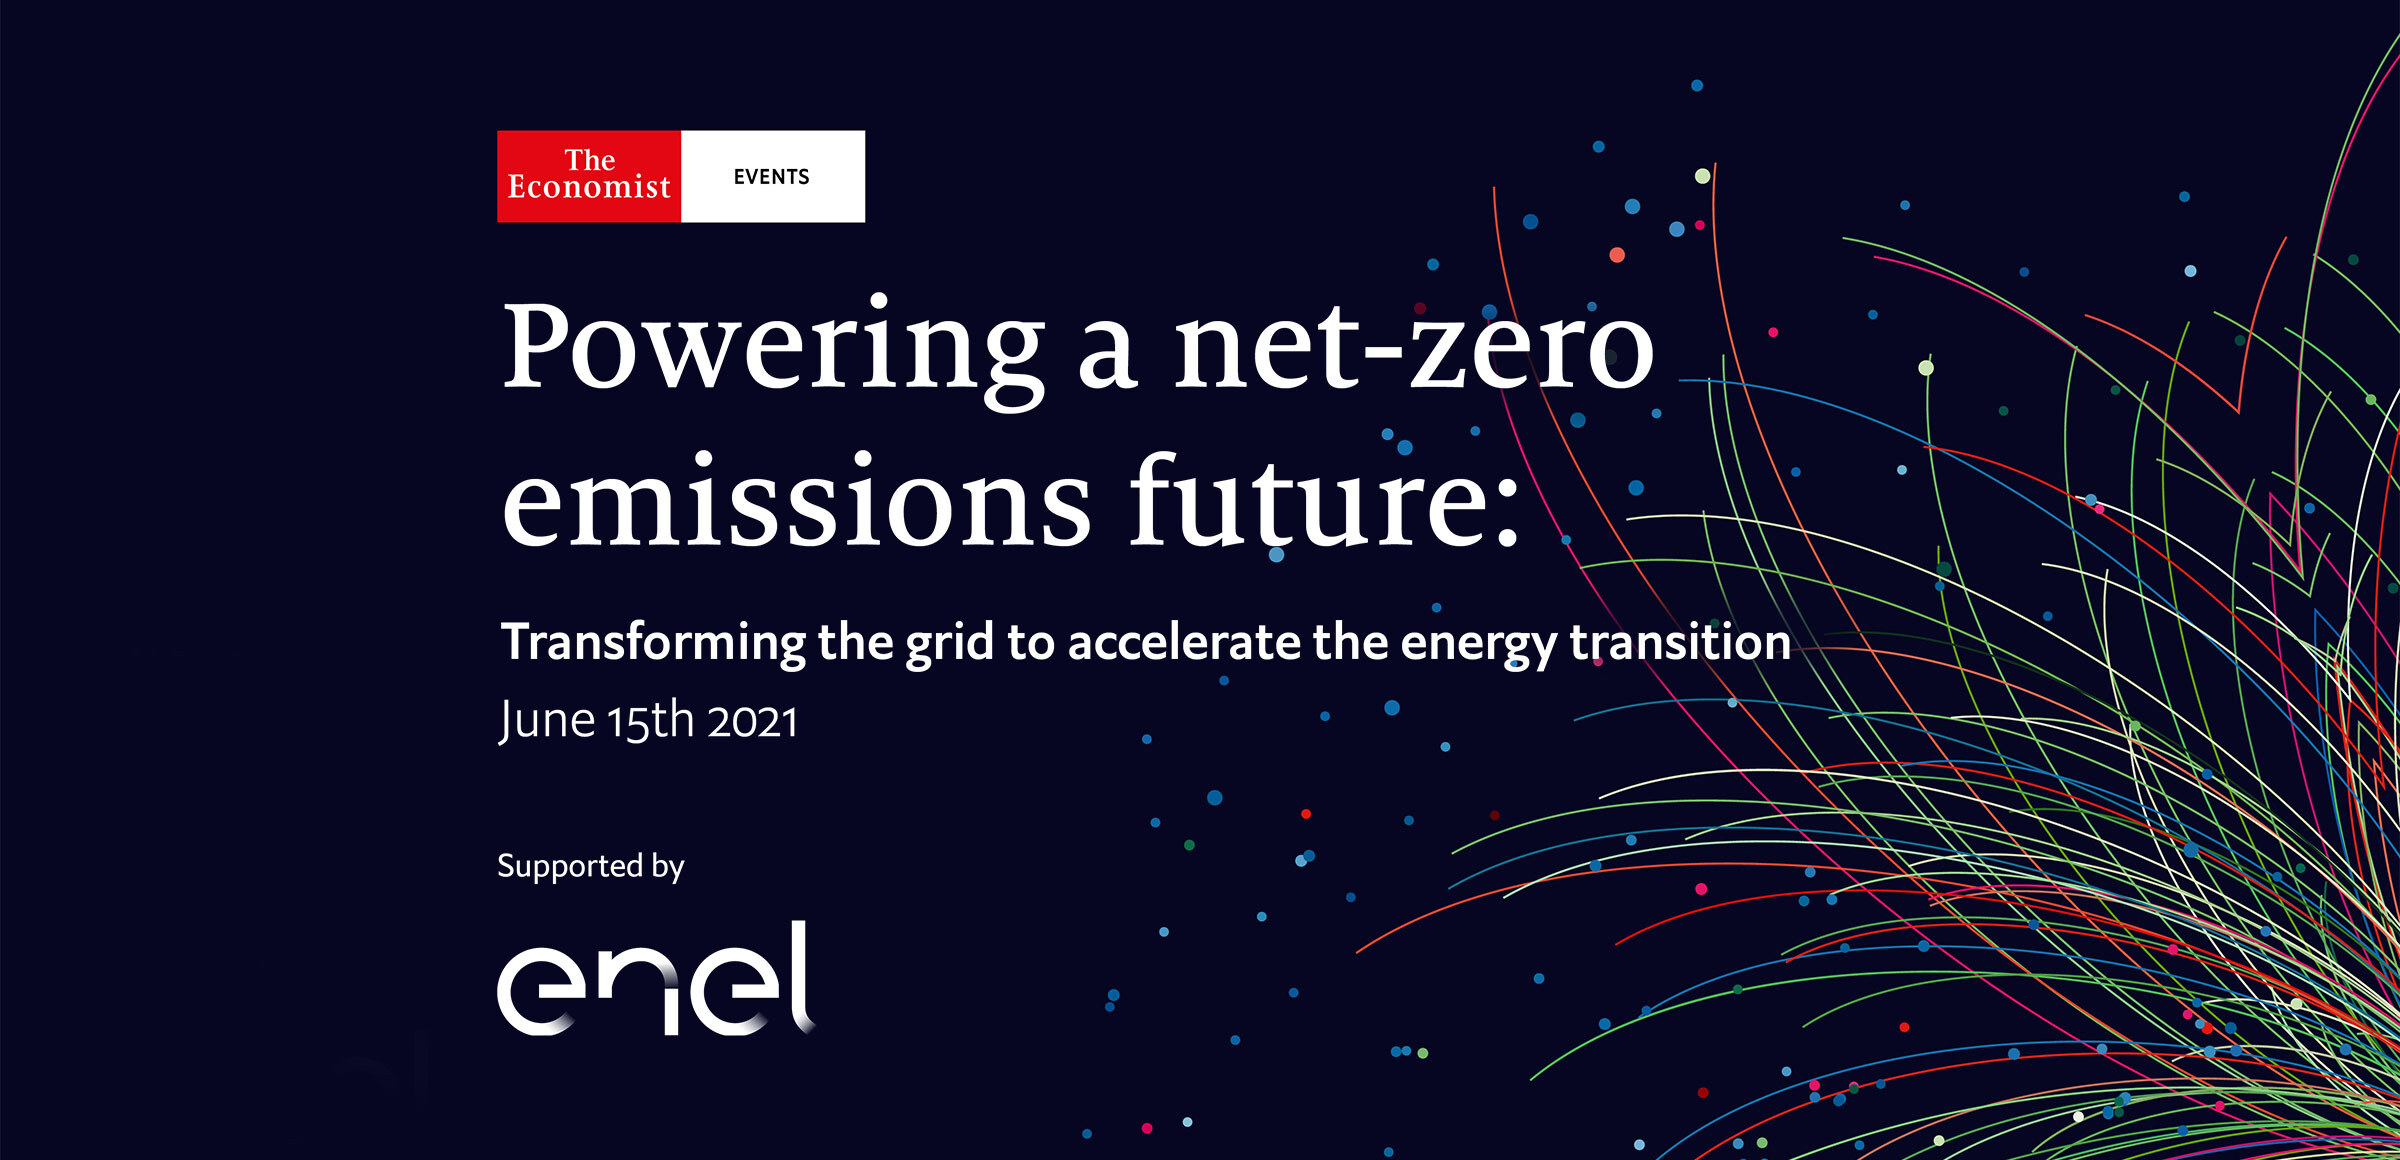 key visual from the webinar | Enel Group